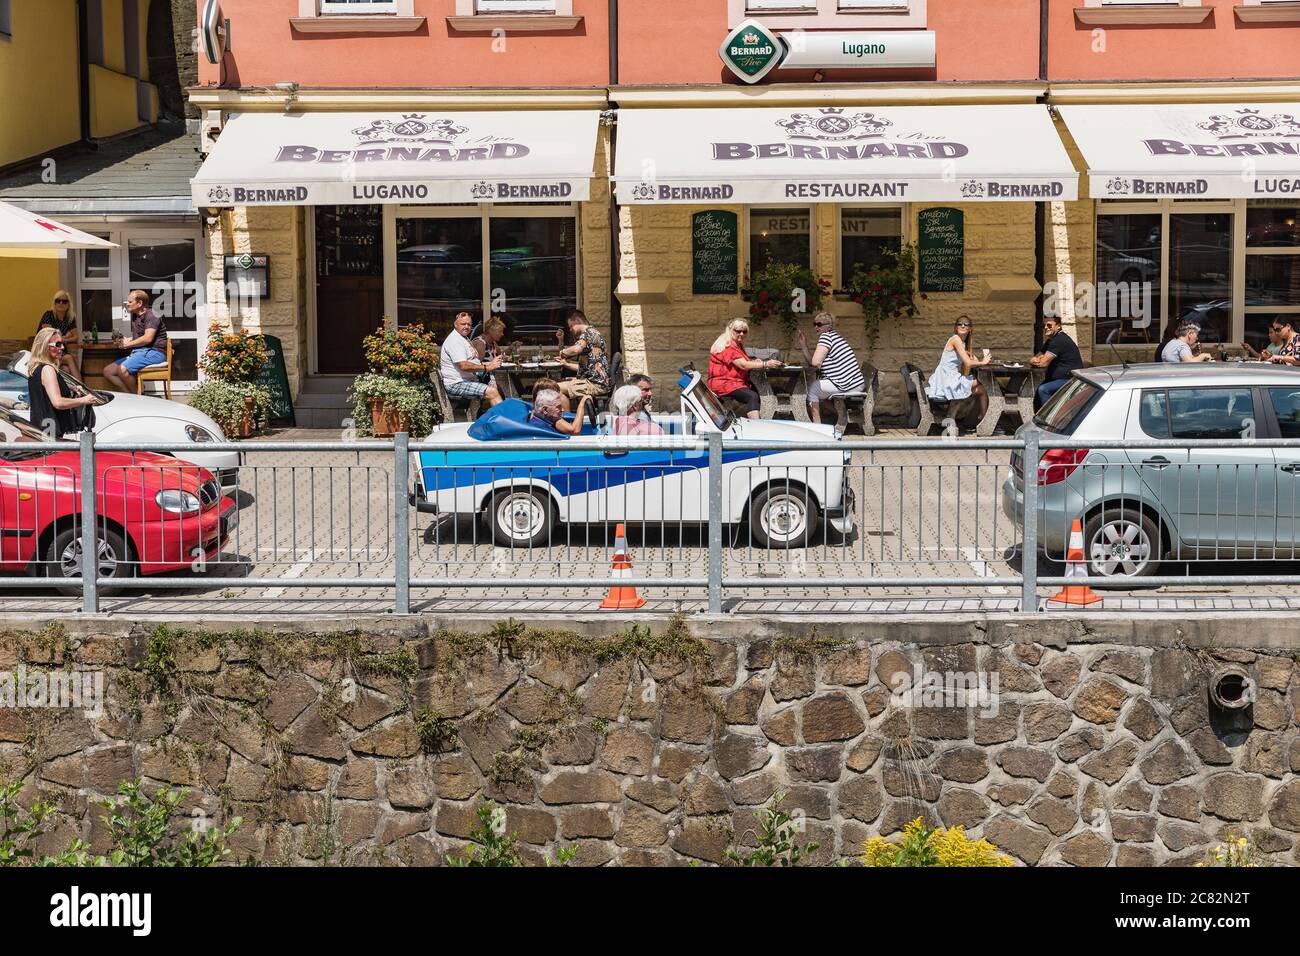 HRENSKO, CZECH REP - JULY 19, 2020. Historic Trabant car modified as a cabriolet. White-blue trabant on a sunny day in Hrensko, Czech Republic. Stock Photo